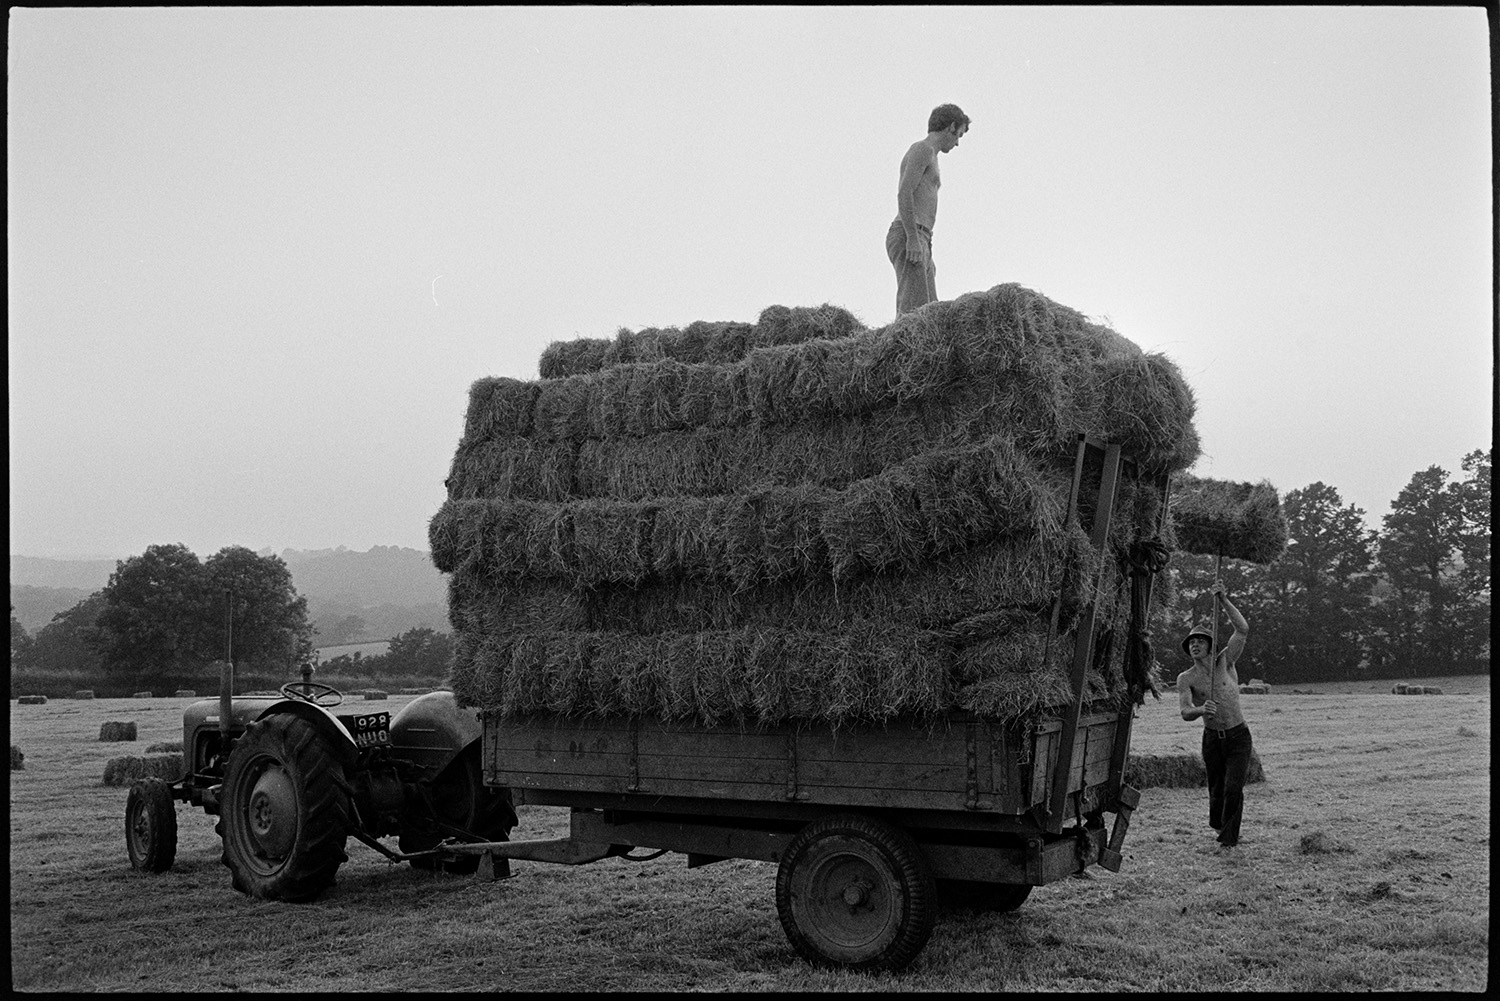 Farmers loading hay on trailer. 
[David Ward and Graham Ward loading hay bales onto a tractor and trailer in a field at Parsonage, Iddesleigh. One of the men is picking up a bale with a pitchfork and taking it to the other man stood on the bales on the trailer. More bales can be seen in the field in the background.]